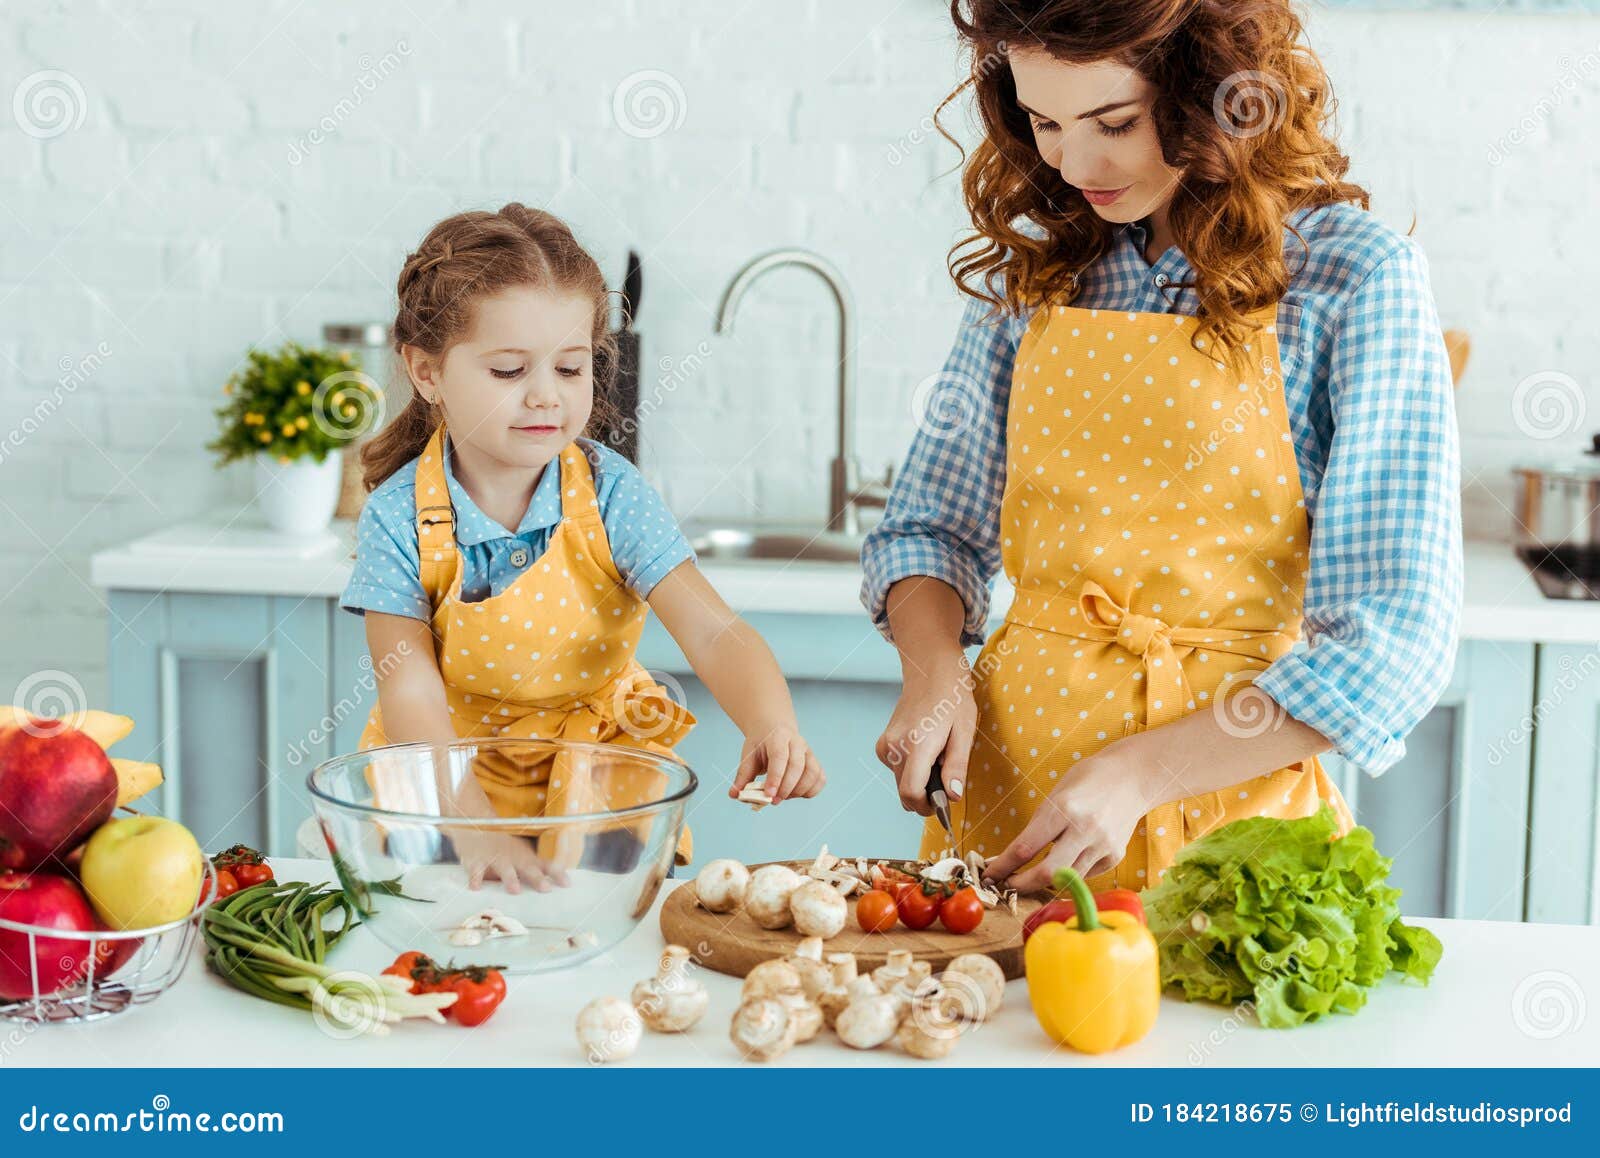 Cute Daughter Helping Mother Cooking Vegetables Stock Image Image Of Knife Apples 184218675 